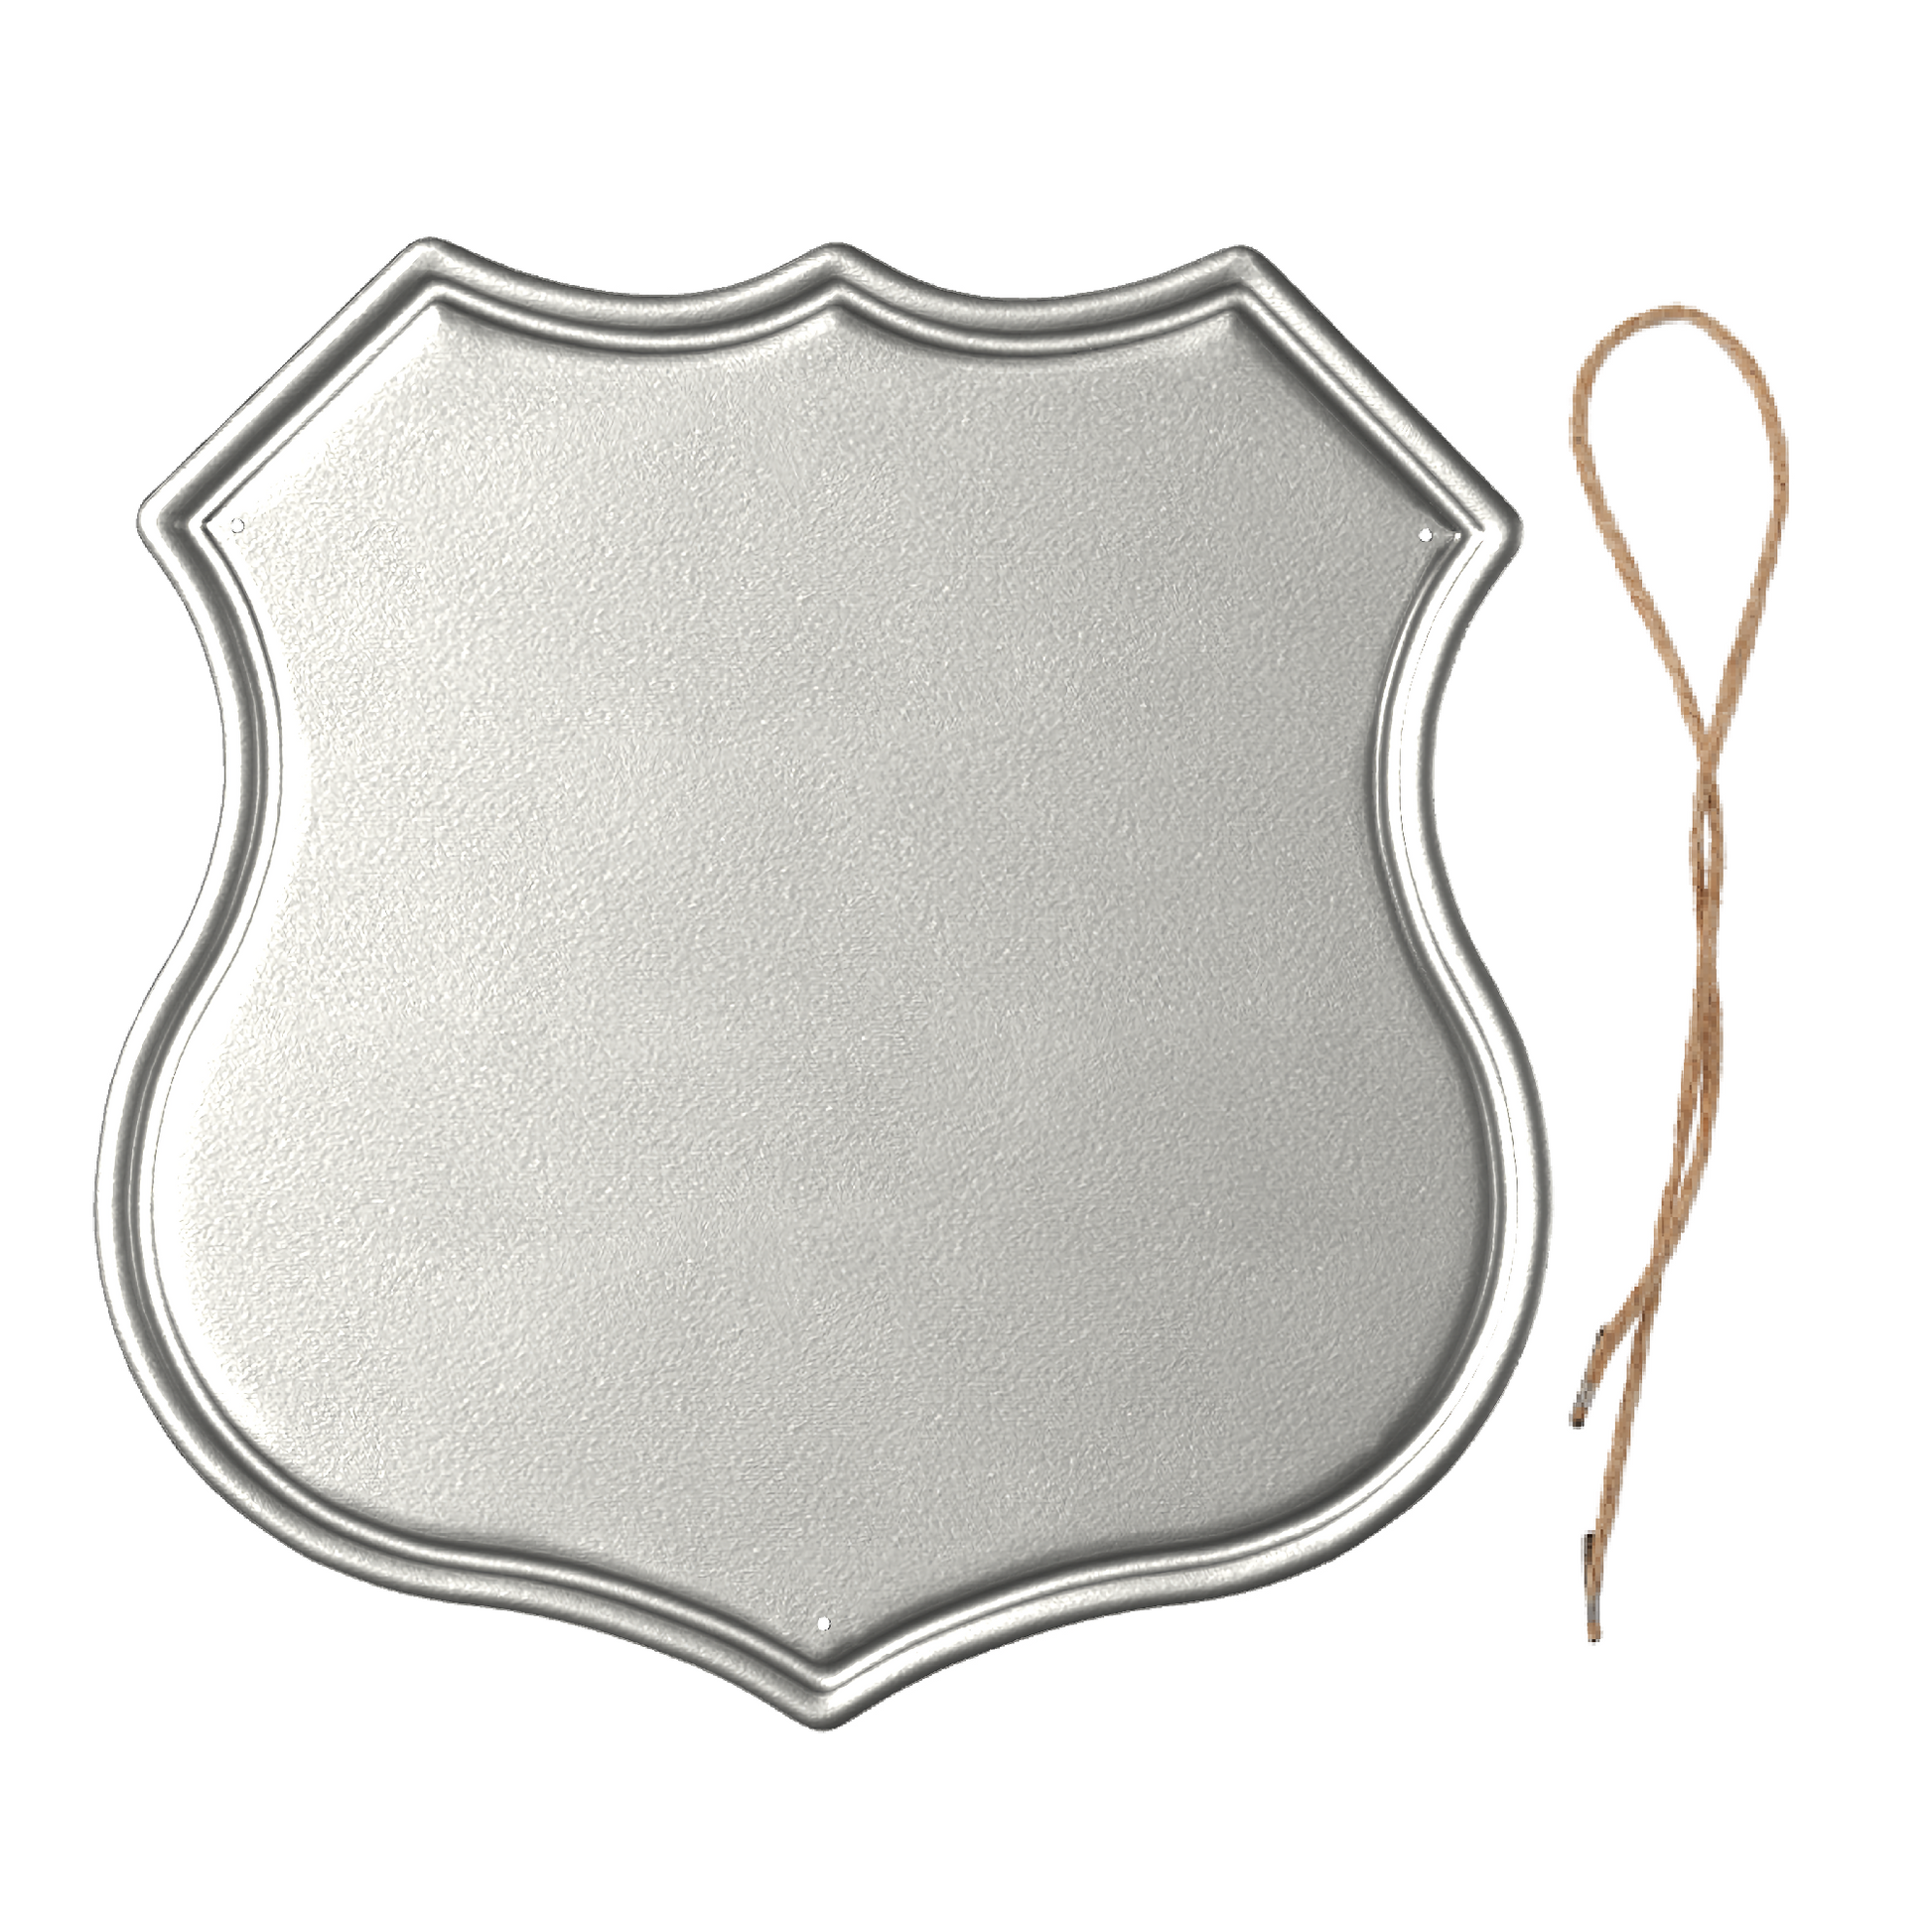 Shield Cut Out Shape Metal Art - Upload Your Own Picture - HayGoodies